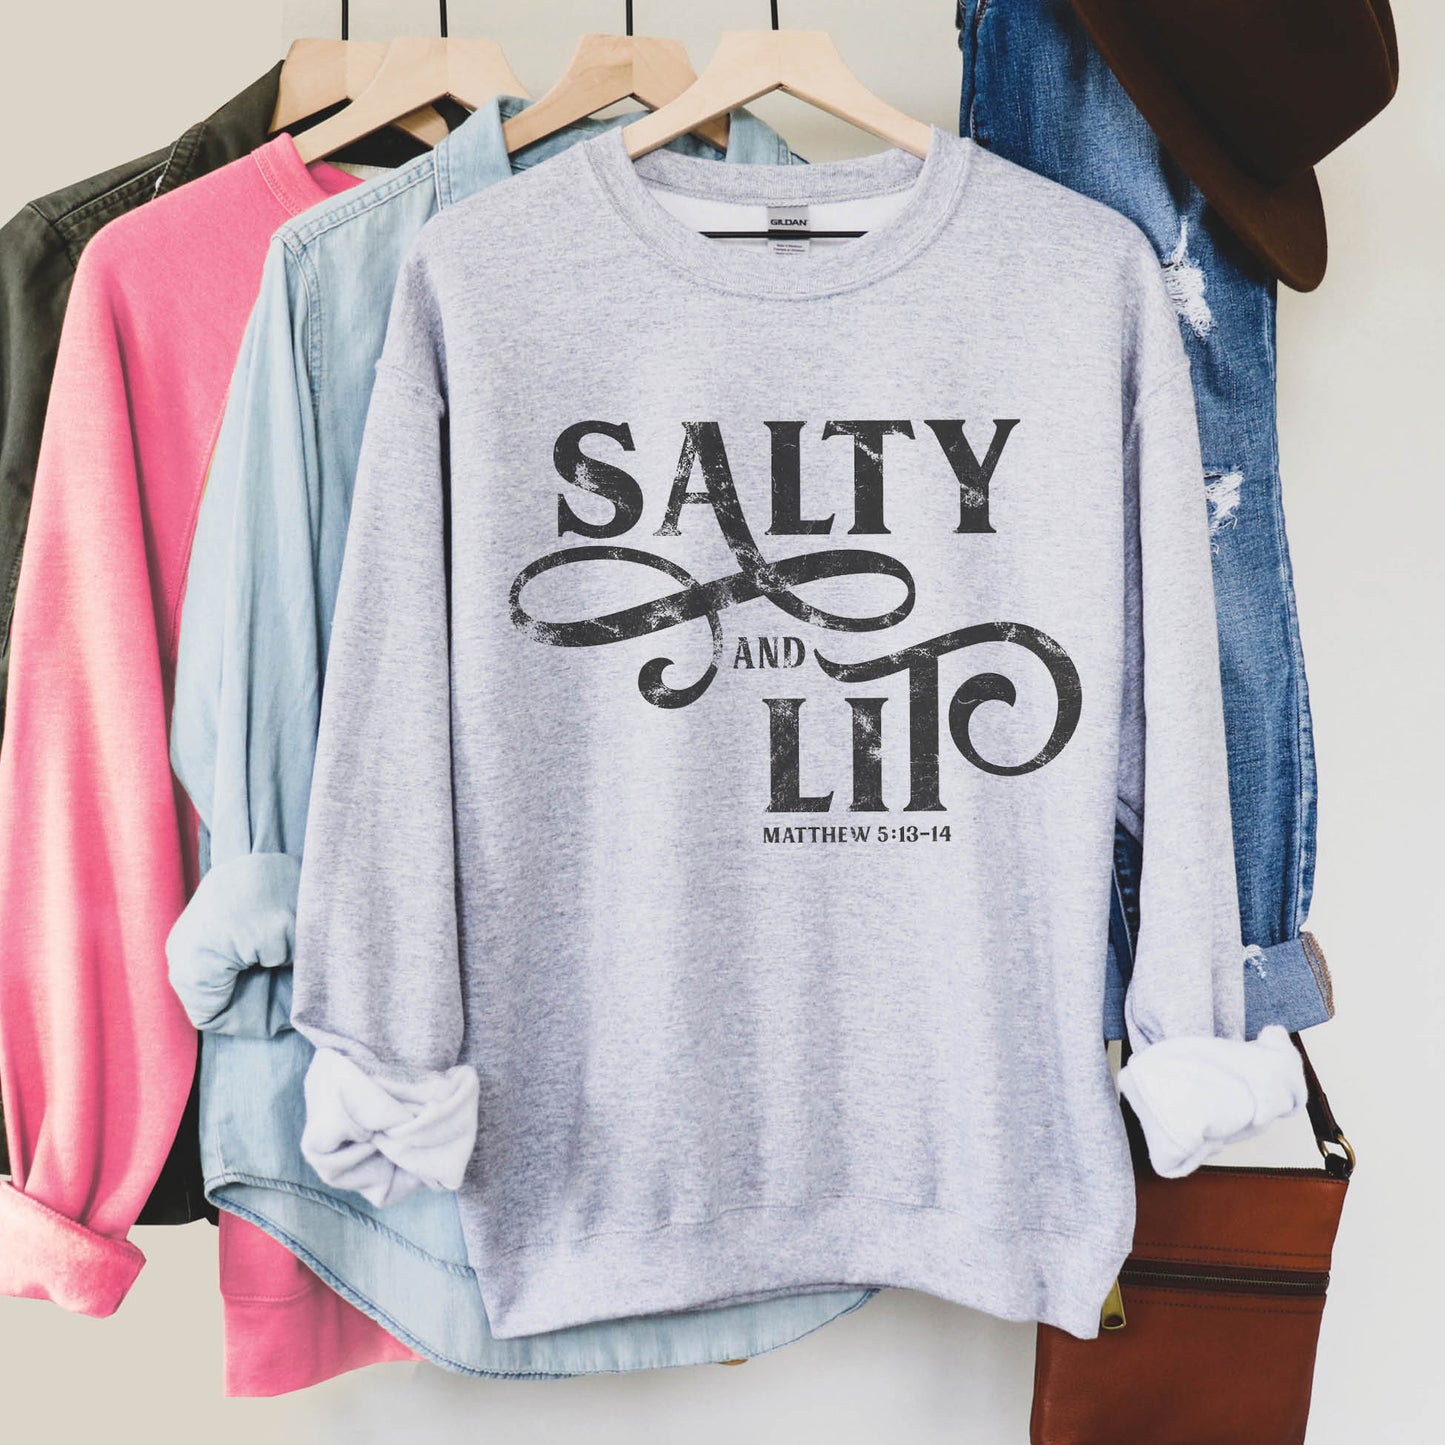 Faith-based "Salty And Lit Matthew 5:13-14" bible verse funny Christian aesthetic unisex crewneck sweatshirt with distressed swirl typography design printed in charcoal gray on cozy heather sport gray sweater for women